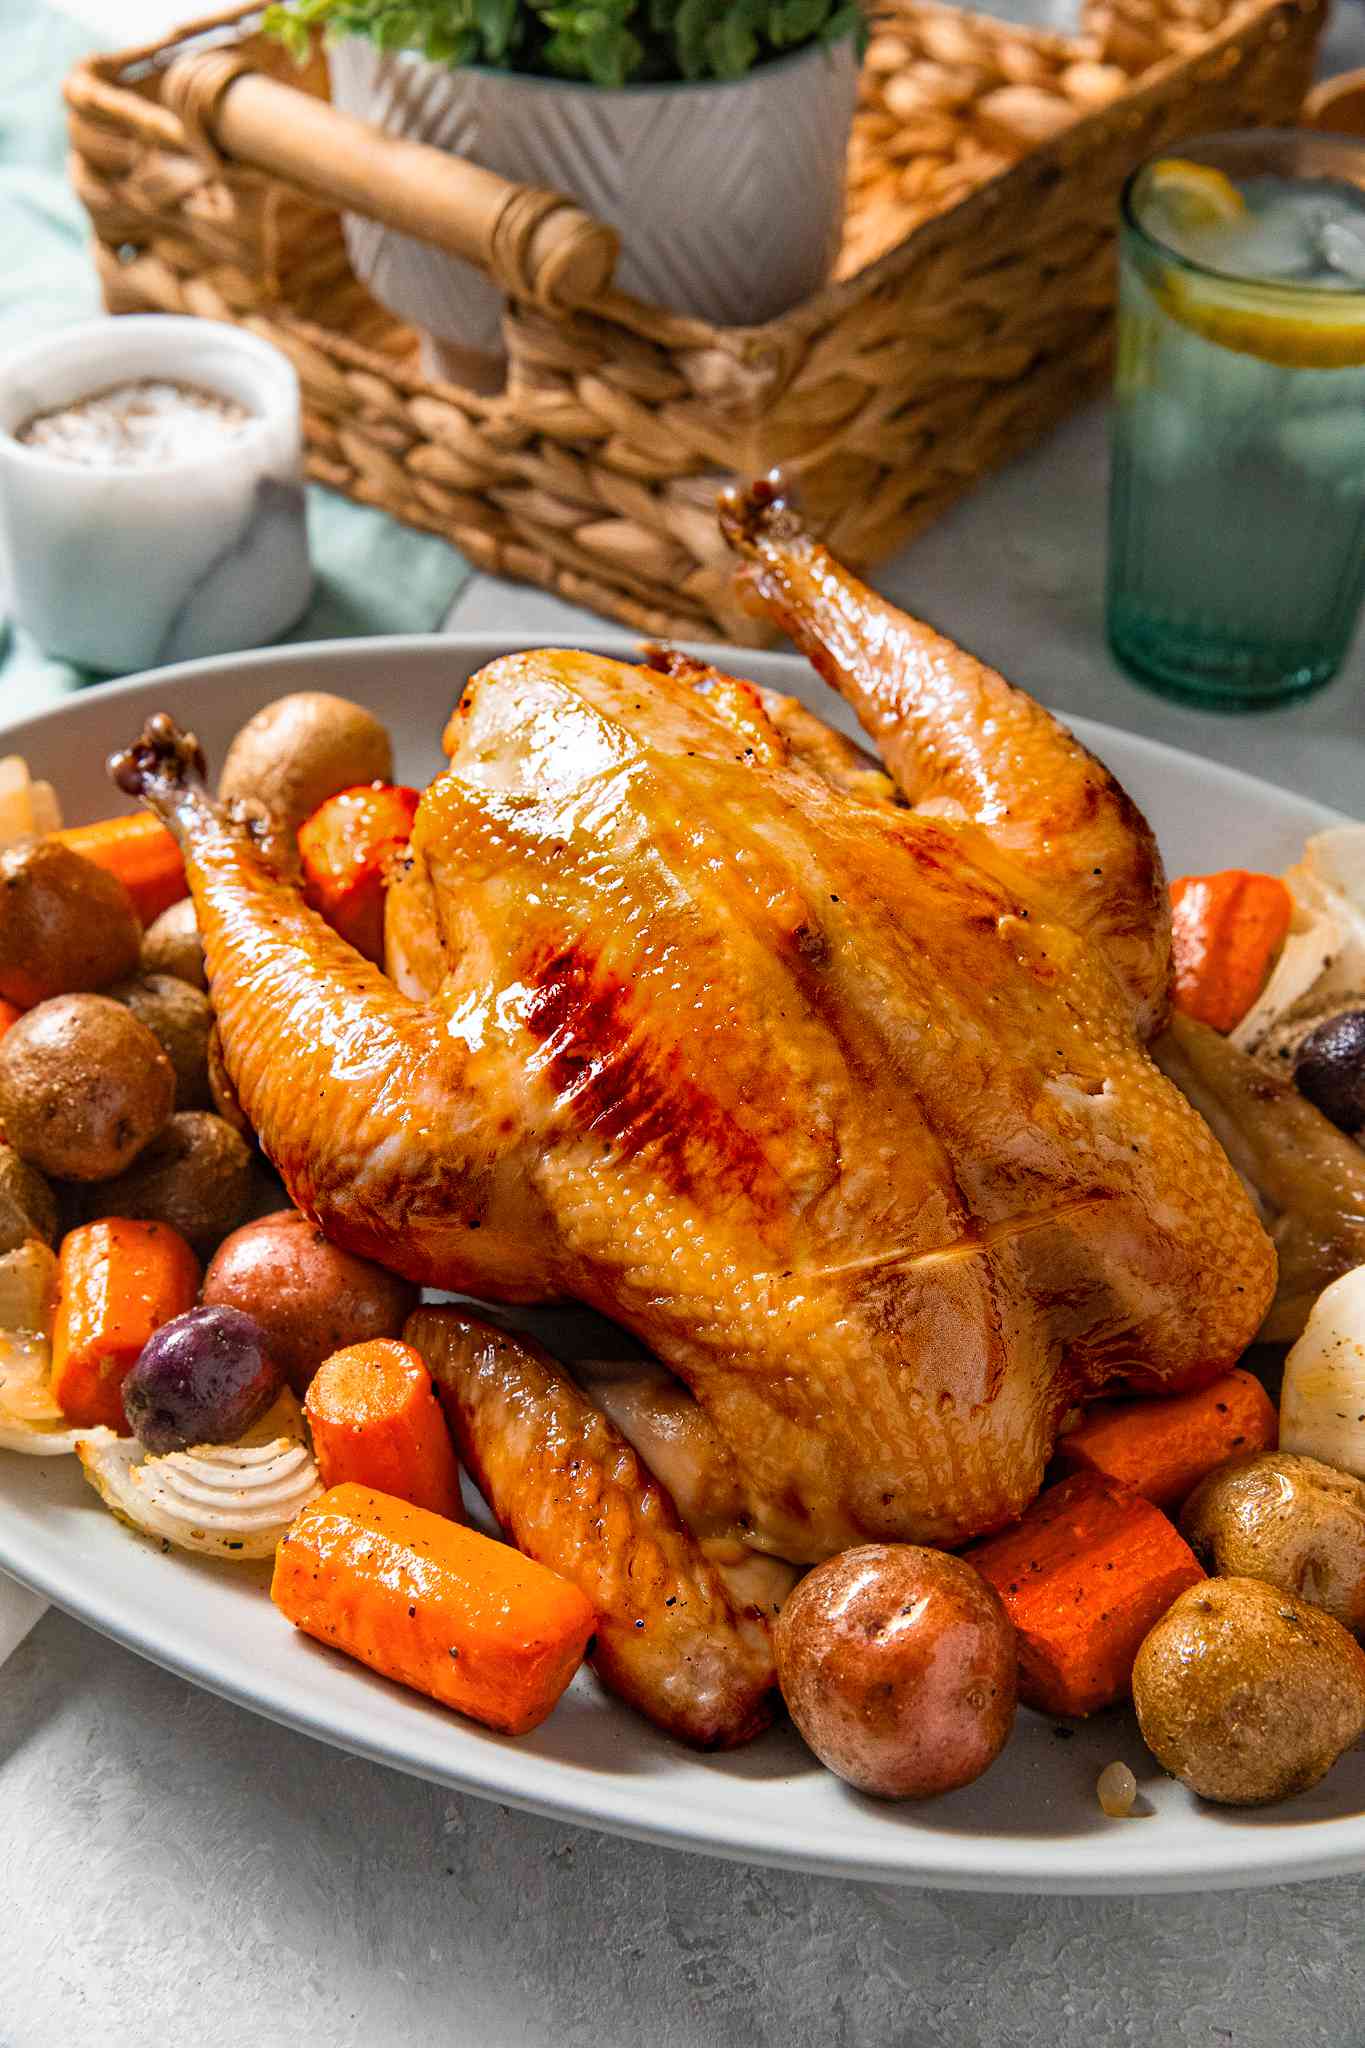 Simple roast chicken served on a bed of roasted vegetables at a table setting with jar of seasoning, a glass of lemon ice water, and a basket with a potted plant